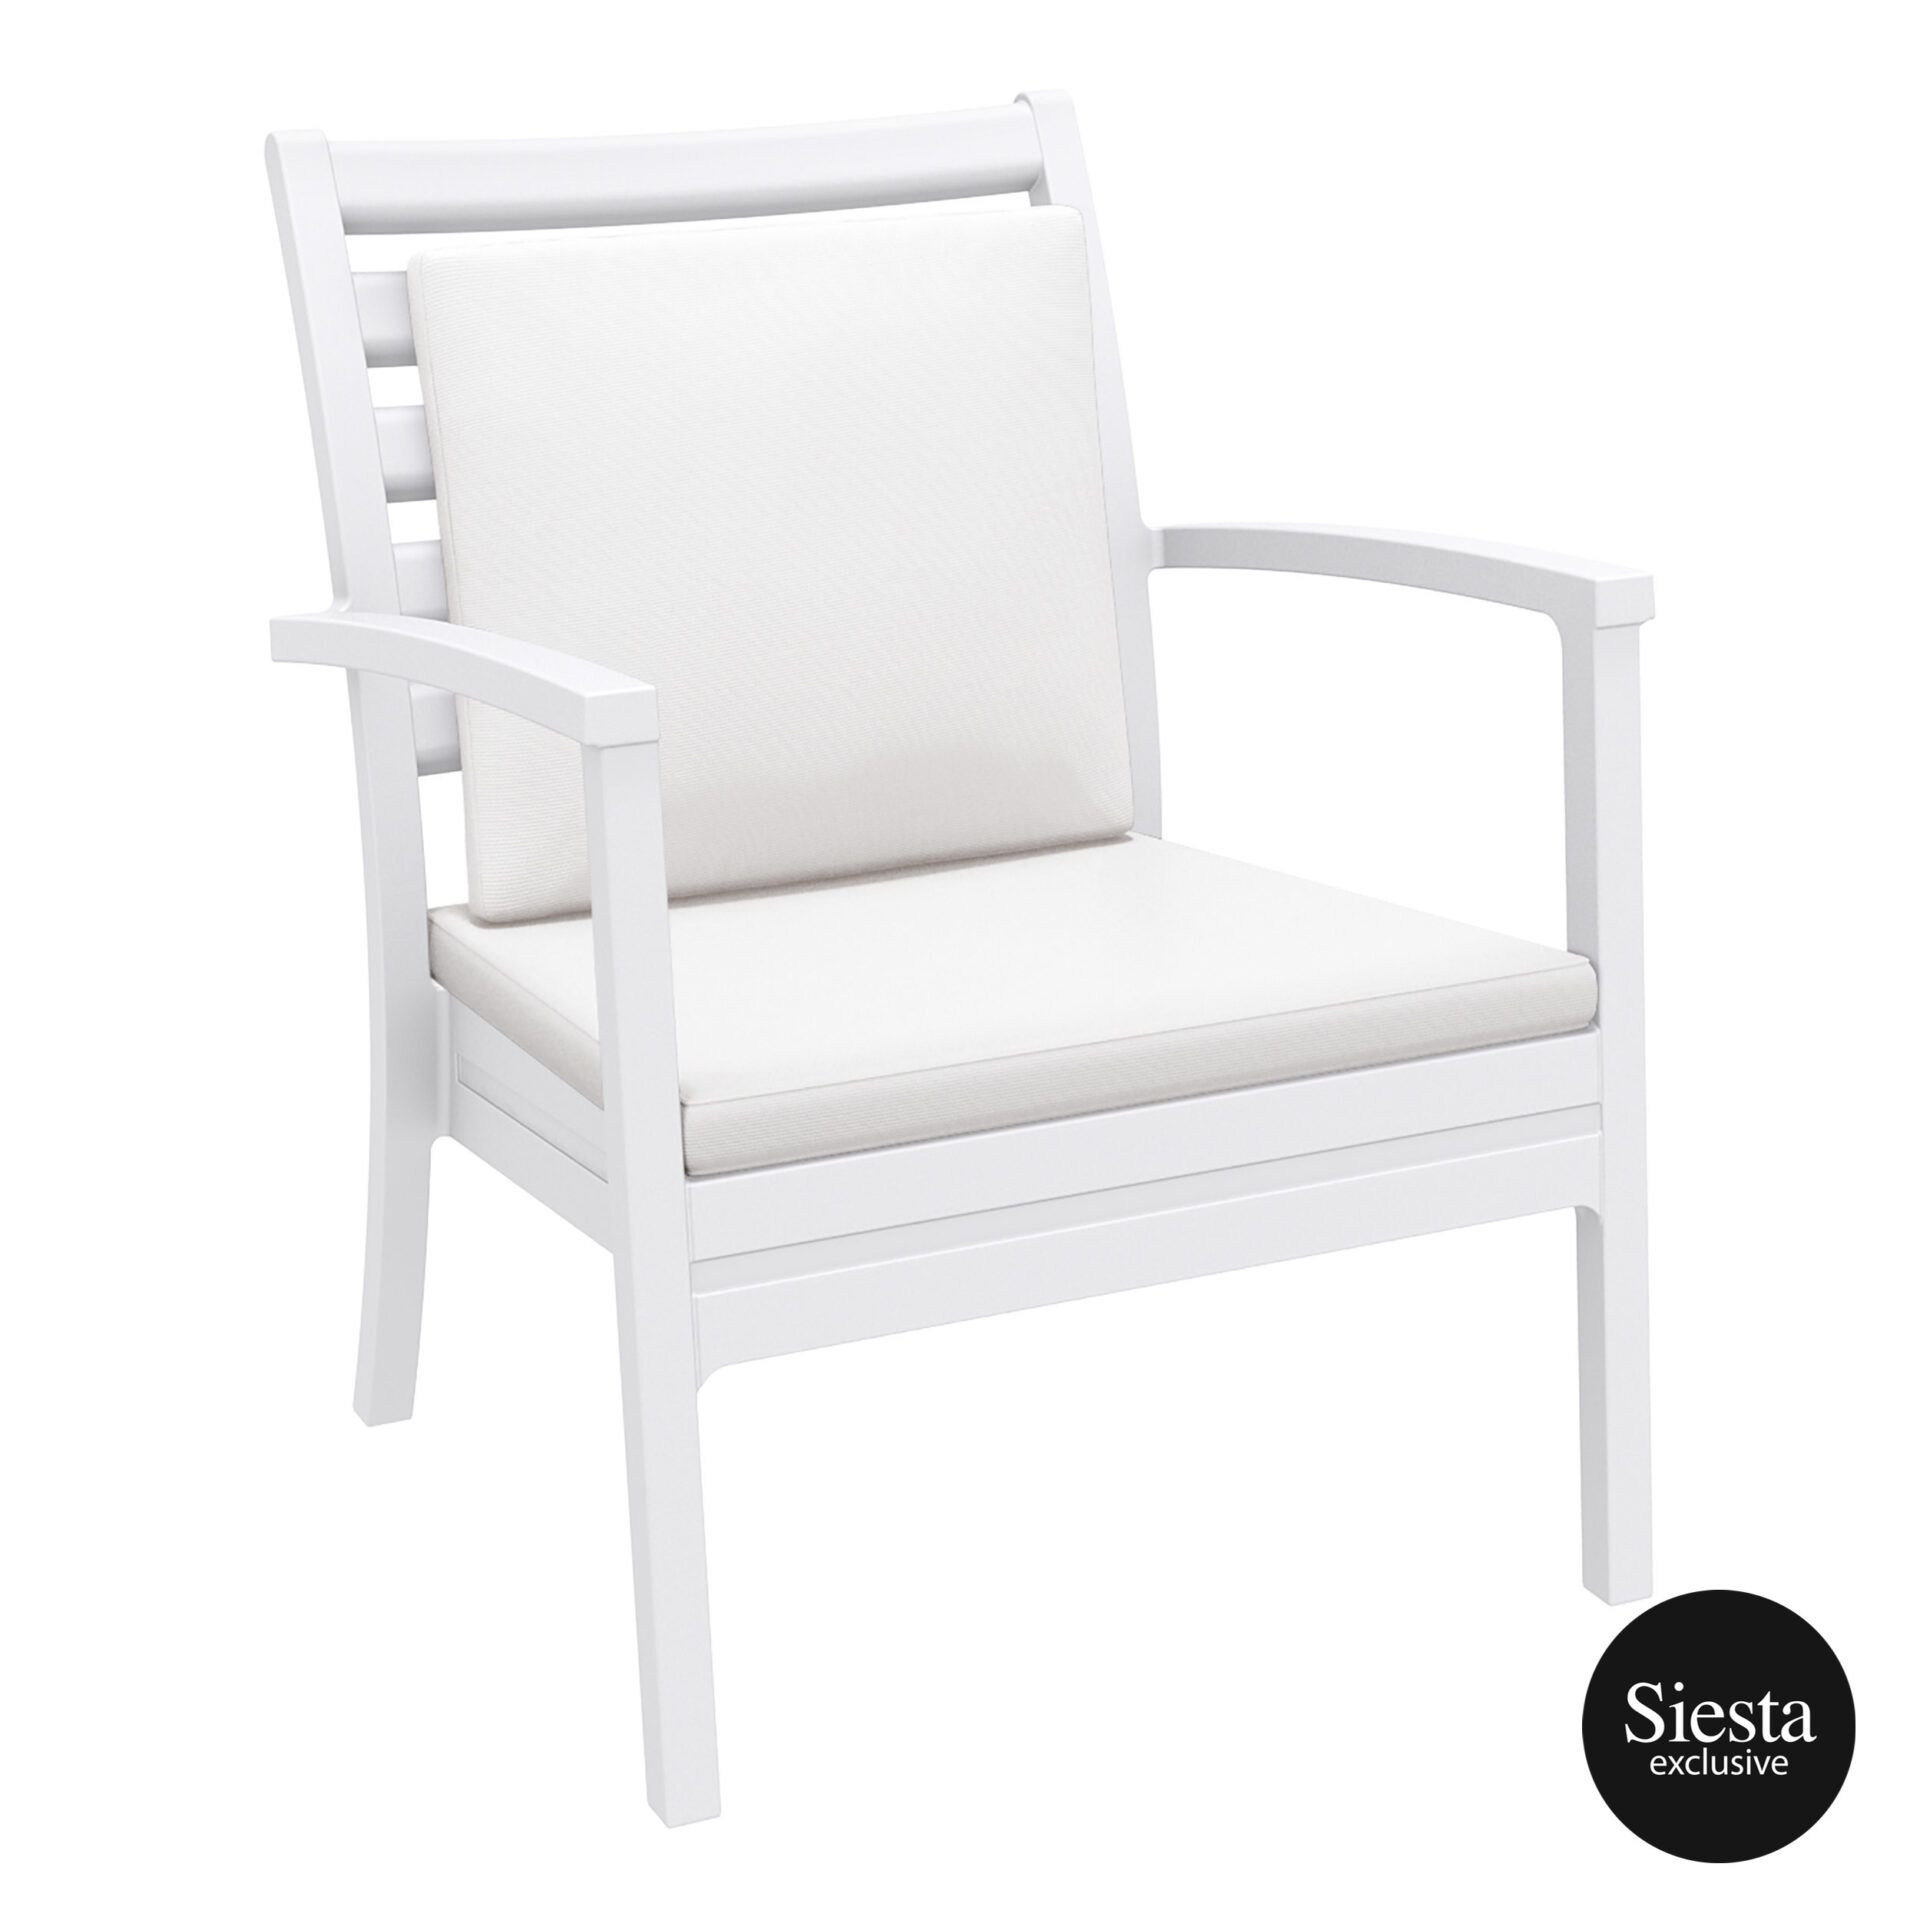 Artemis XL Armchair - White with White Seat and Back Cushion